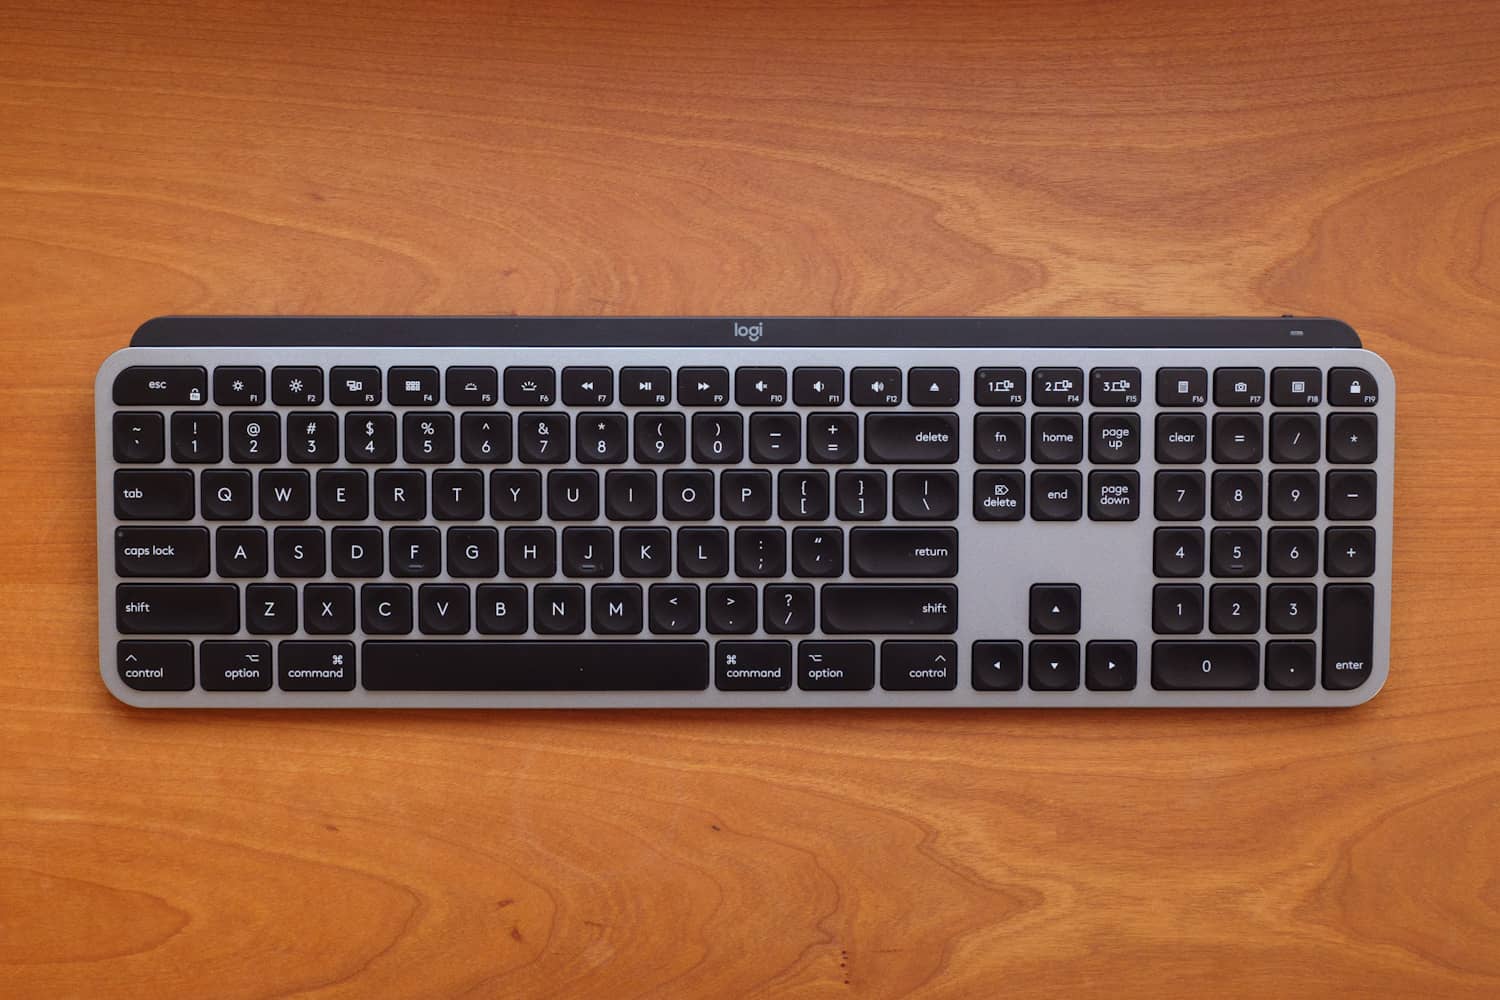 what key on a windows keyboard is the command key for mac